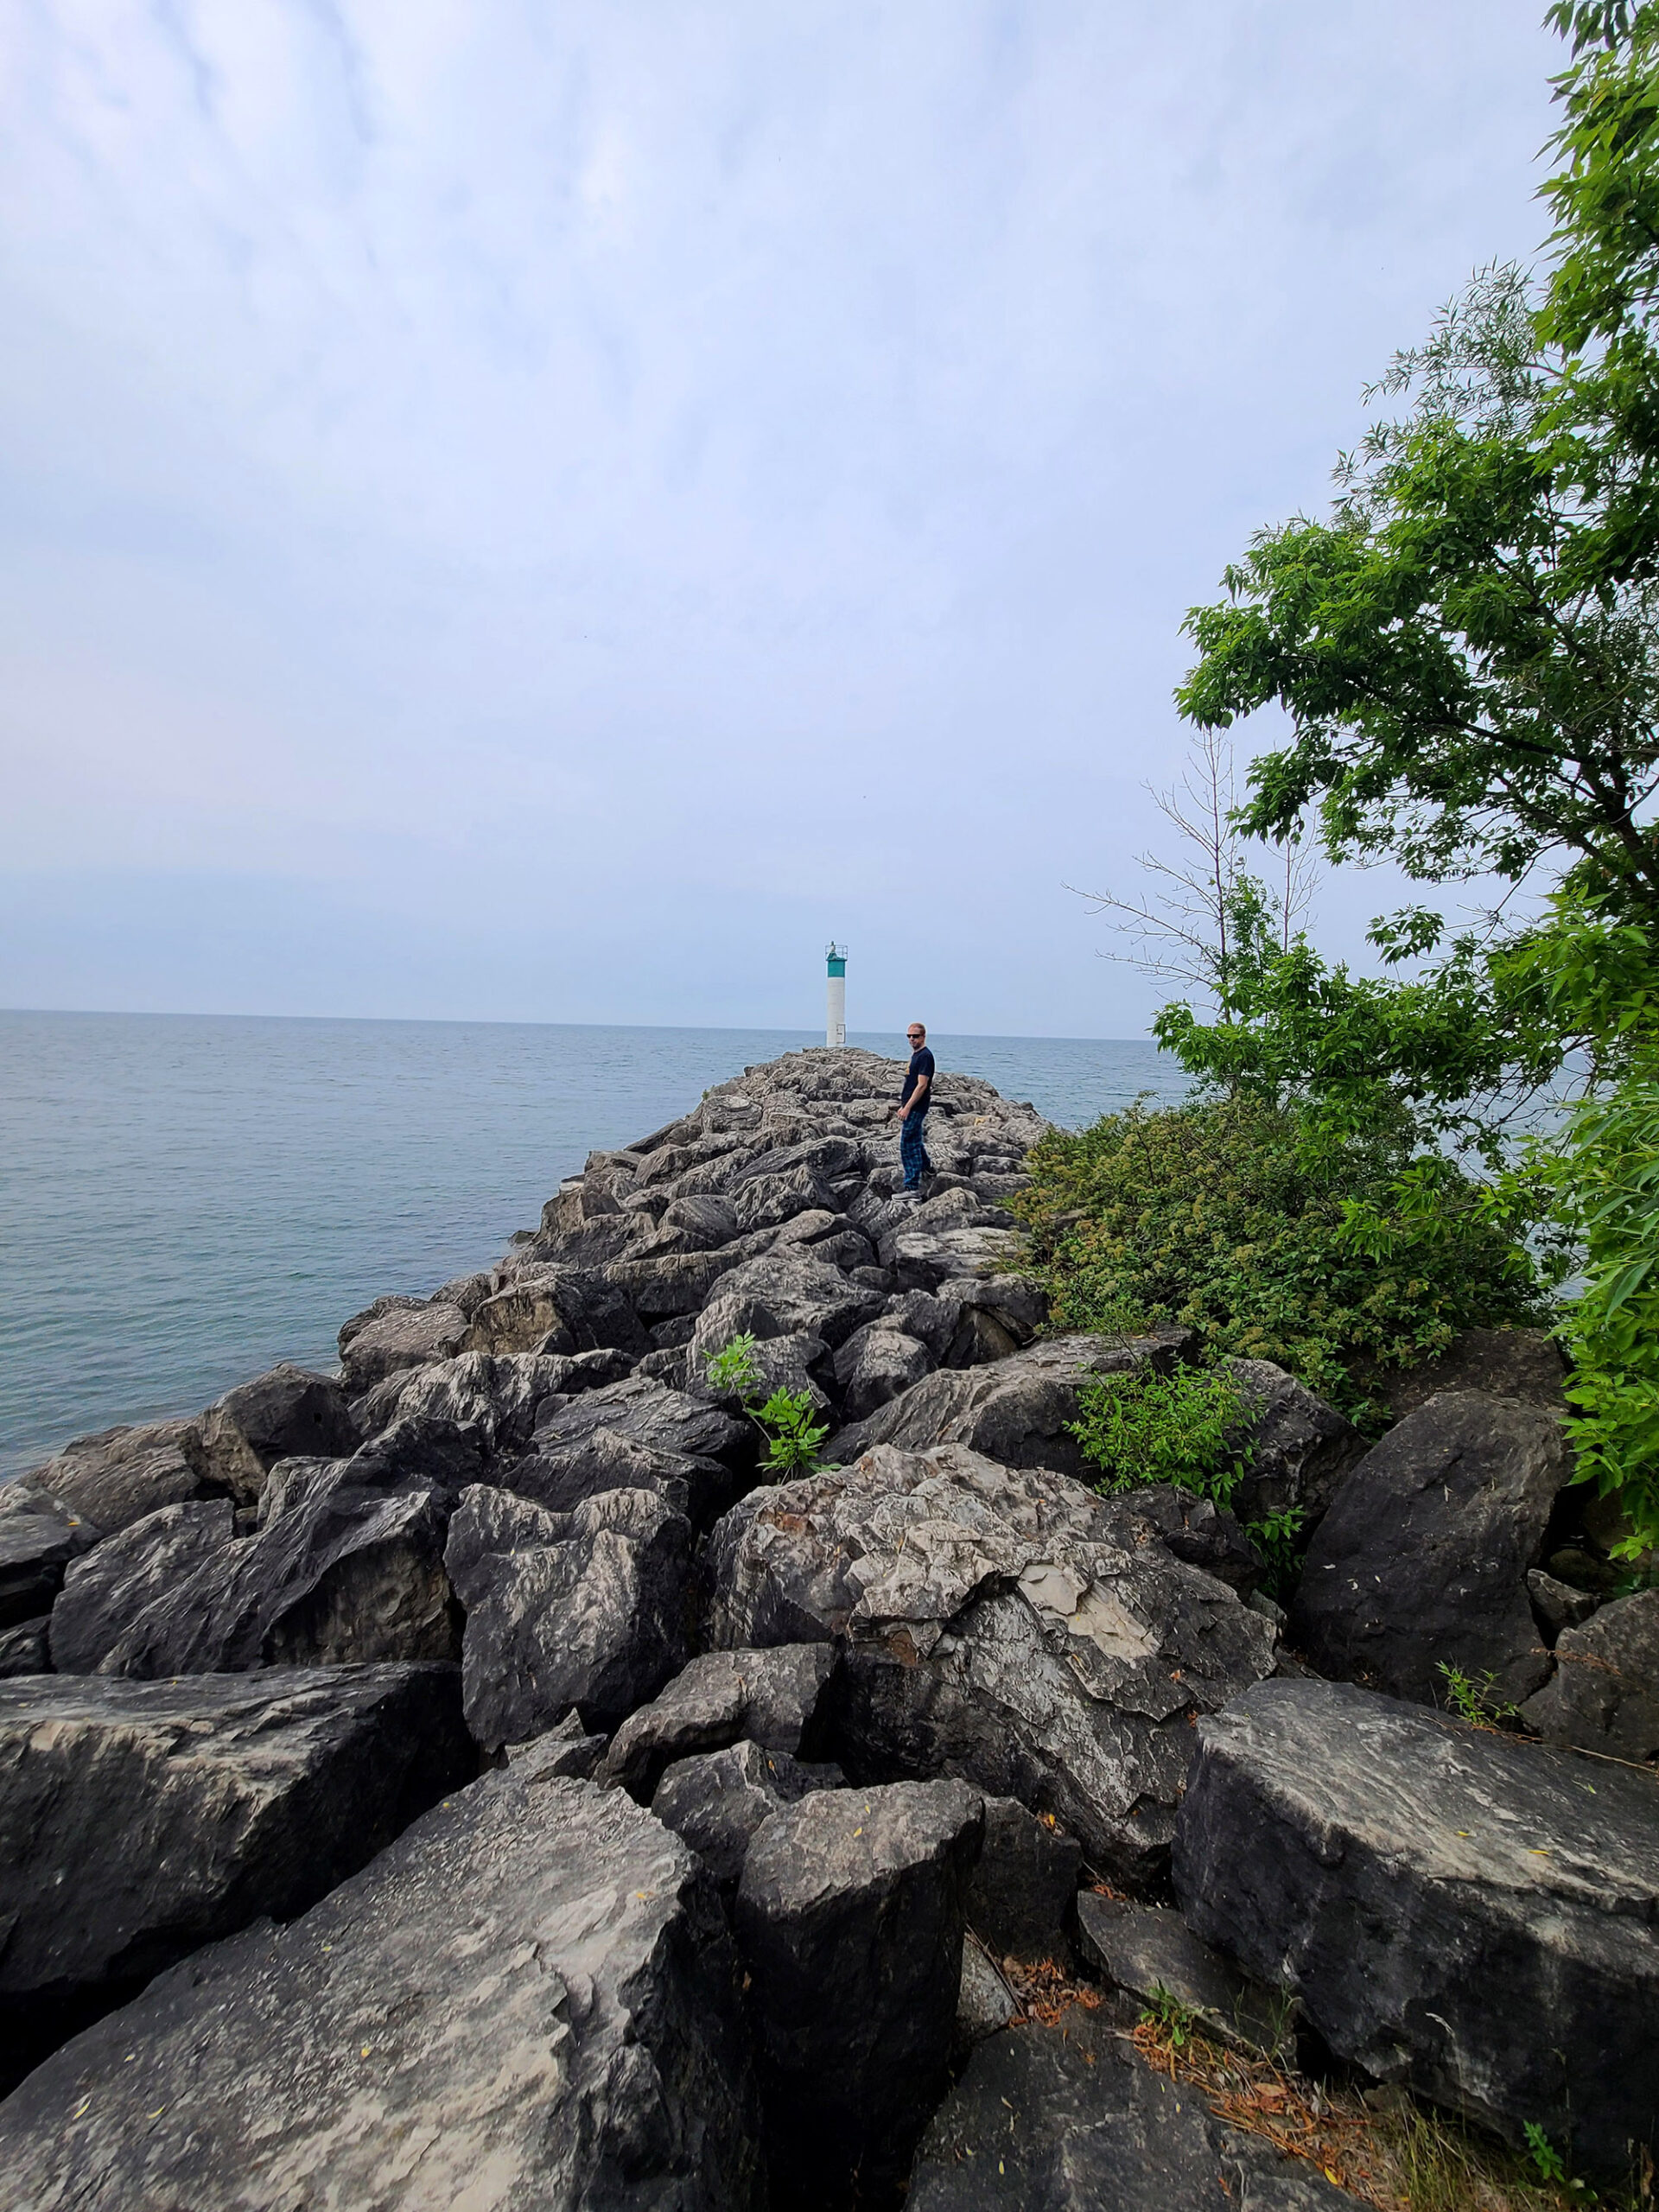 A long pile of boulders jutting out into lake ontario, with a lighthouse in the background.